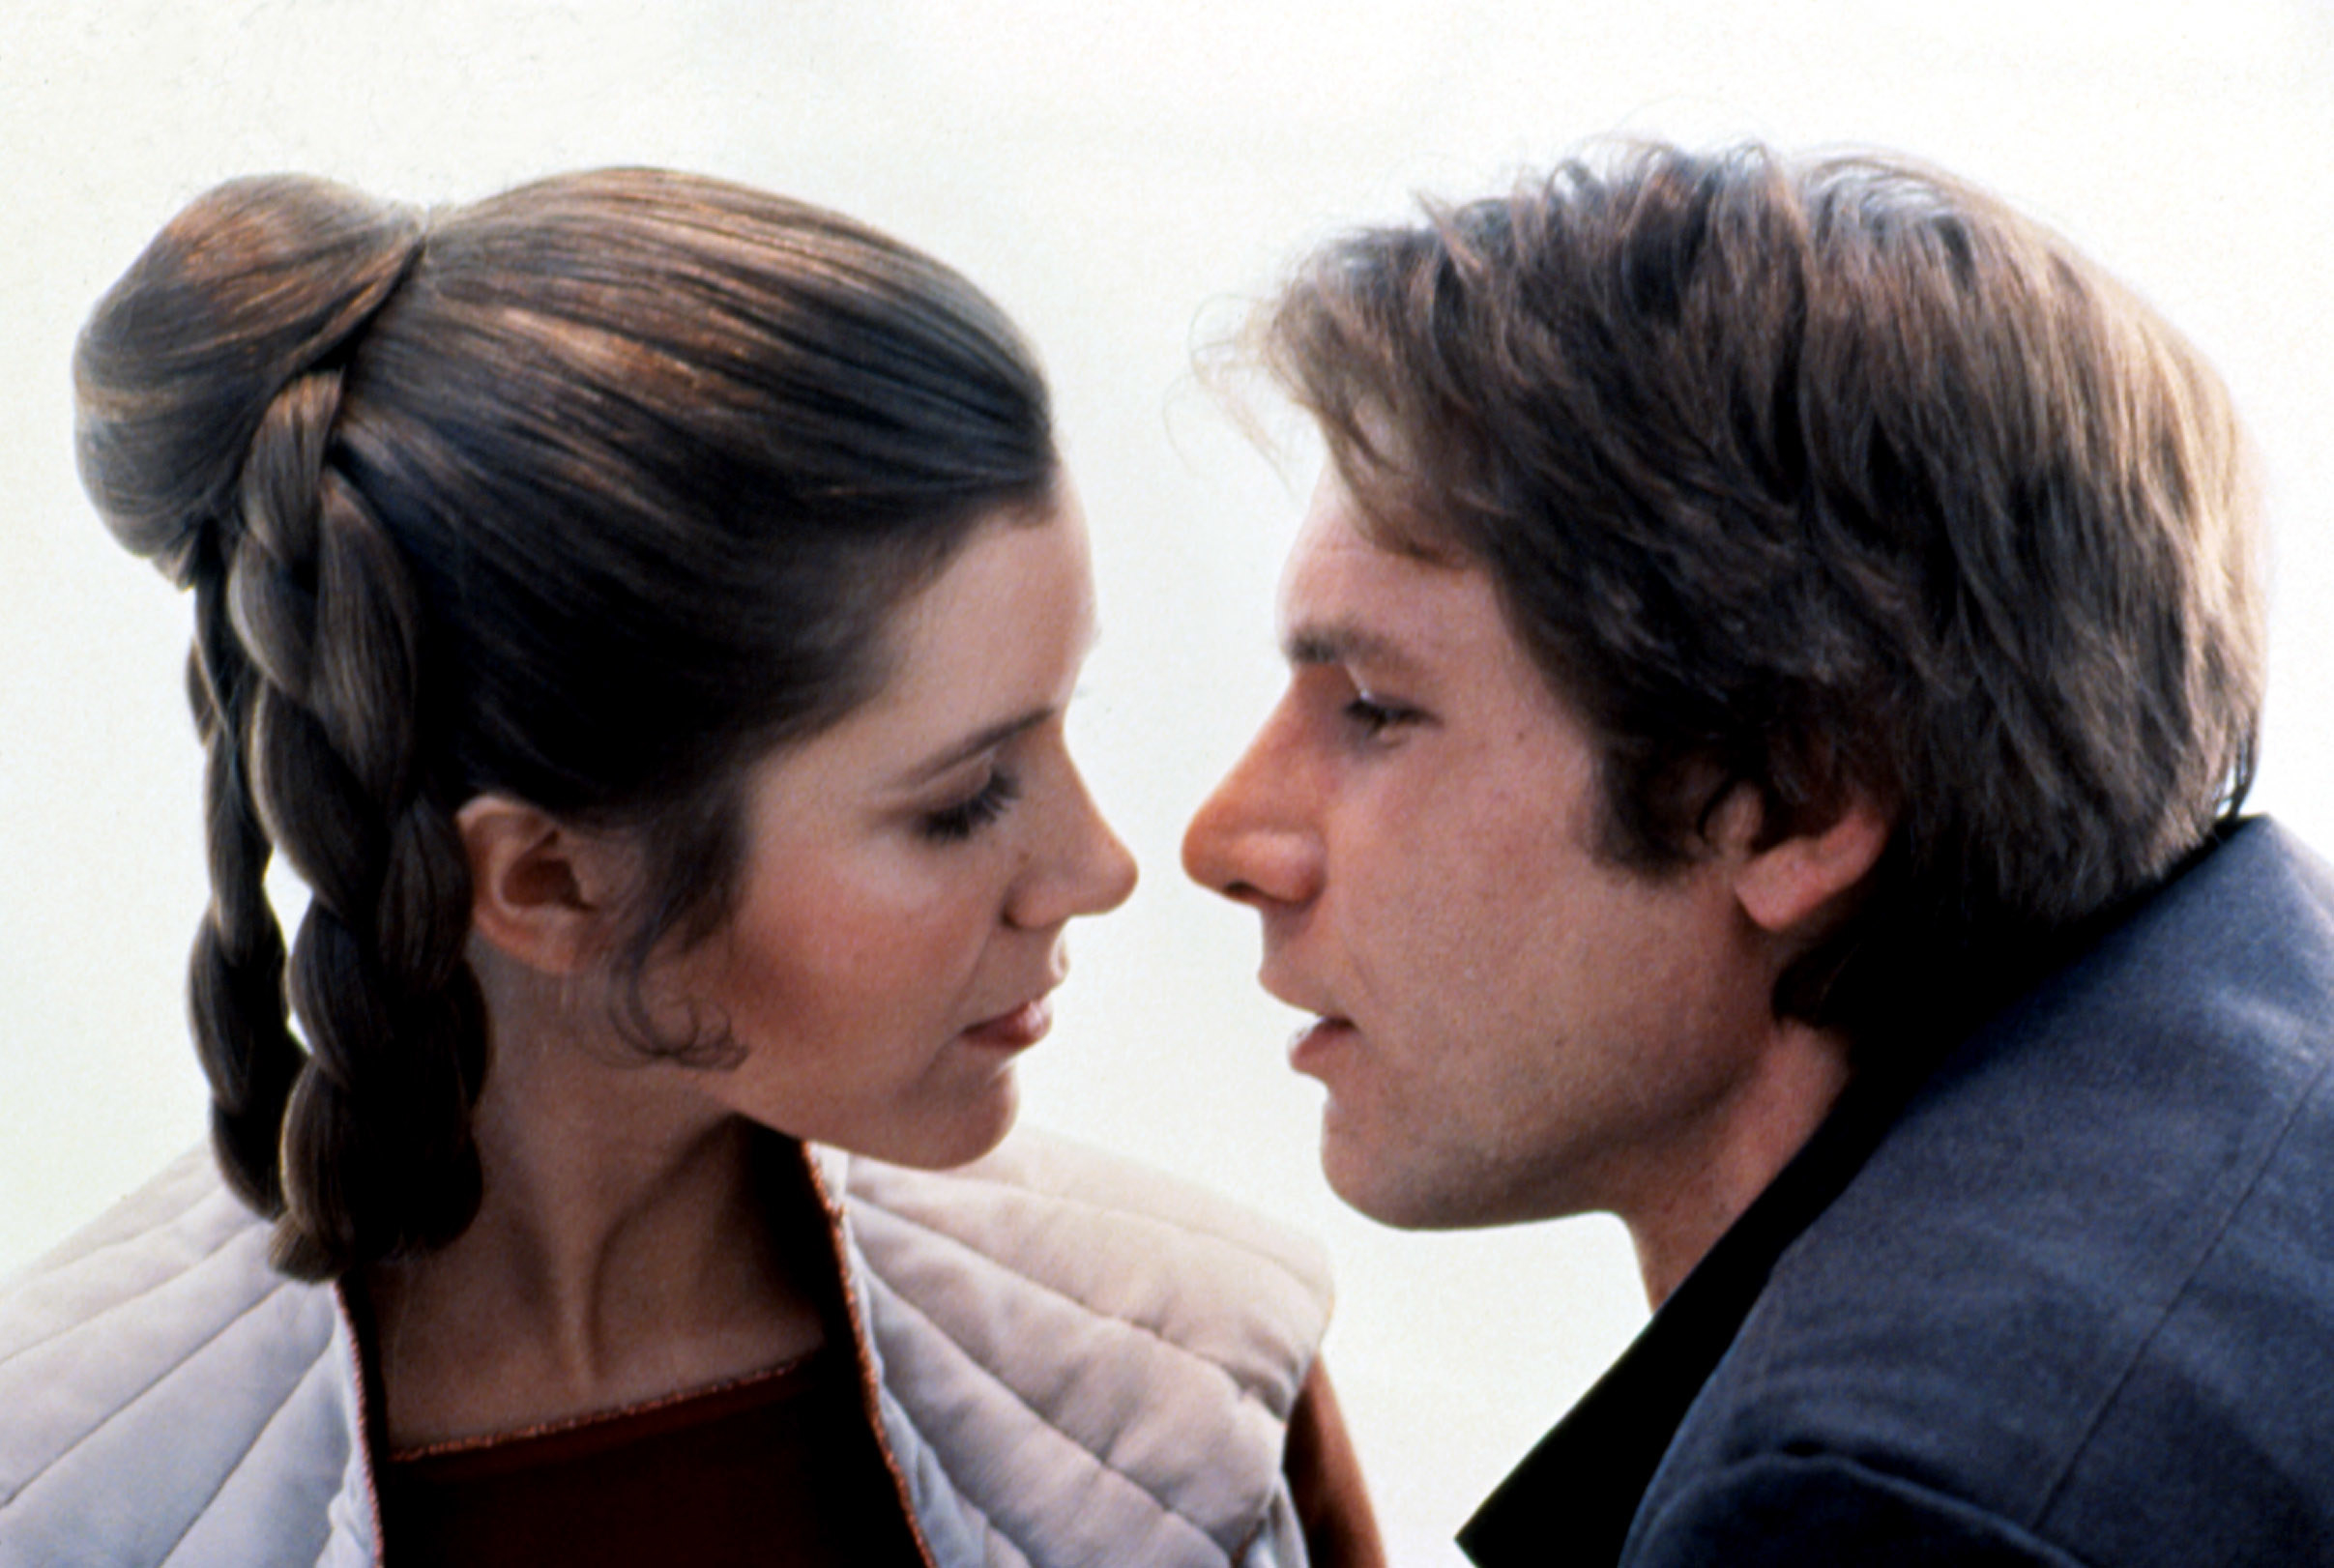 Han and Leia about to kiss